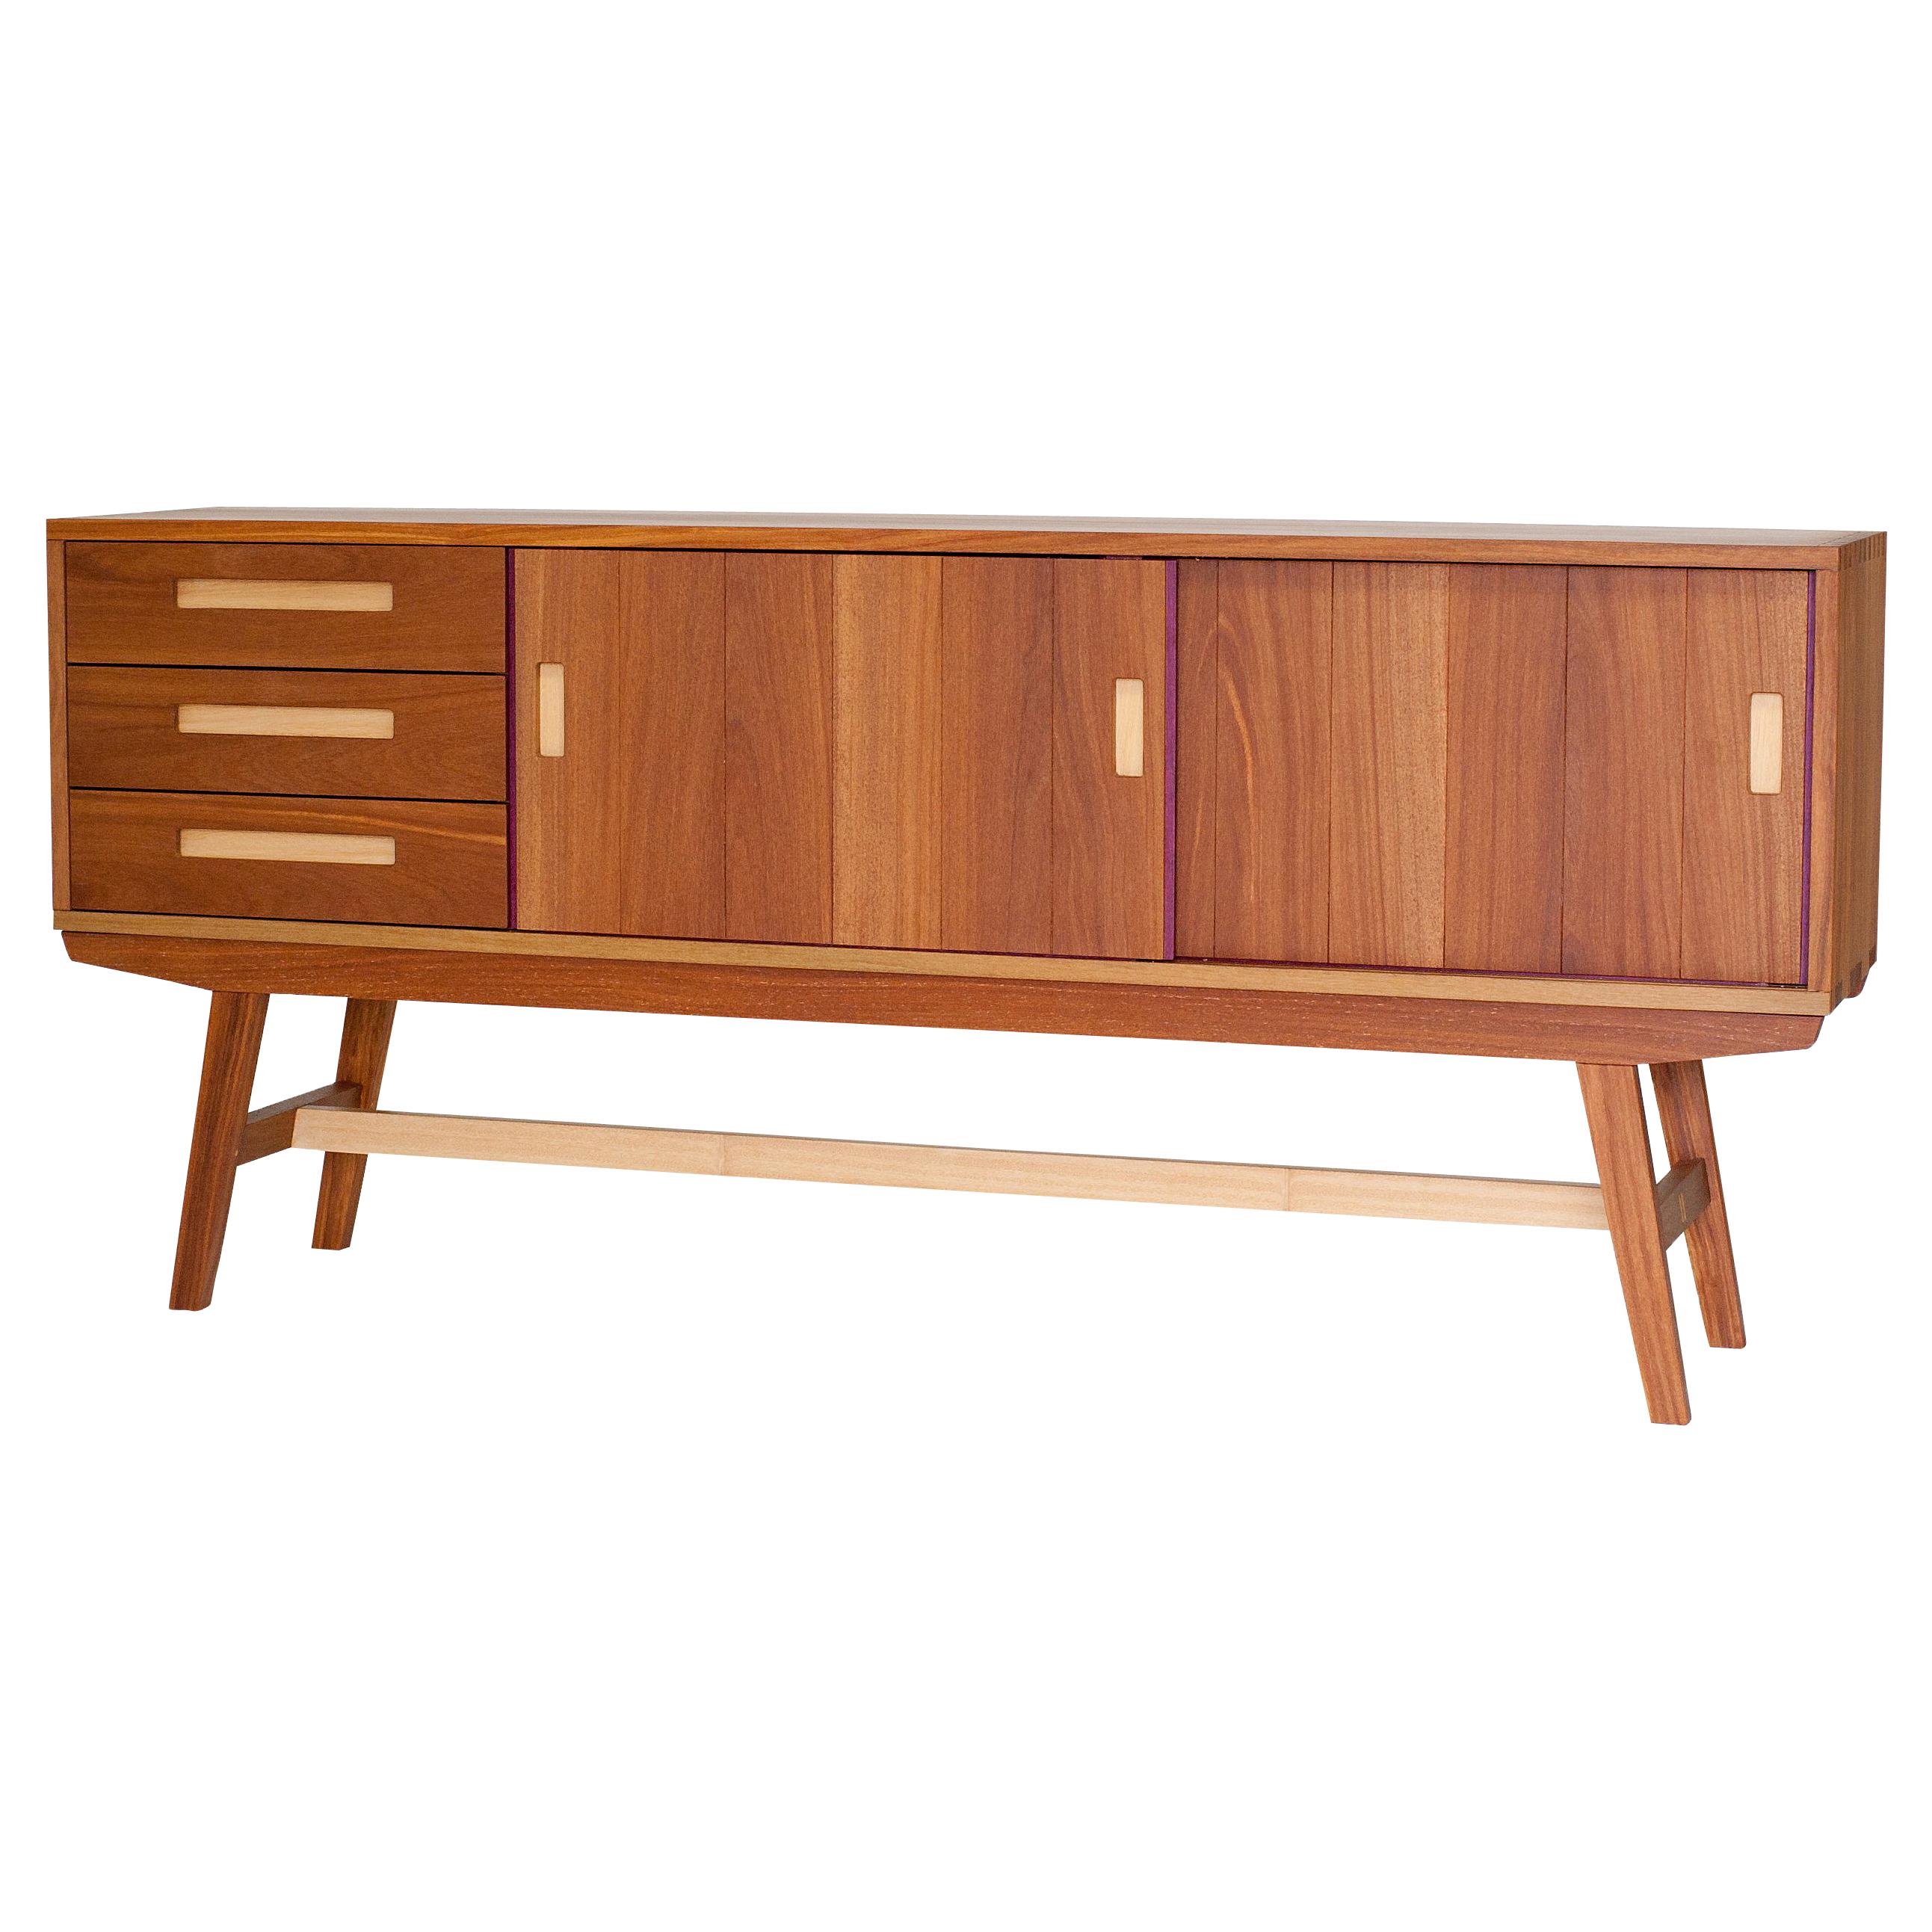 Credenza Buffet by Ricardo Graham Ferreira Handcrafted in Brazilian Hardwood For Sale